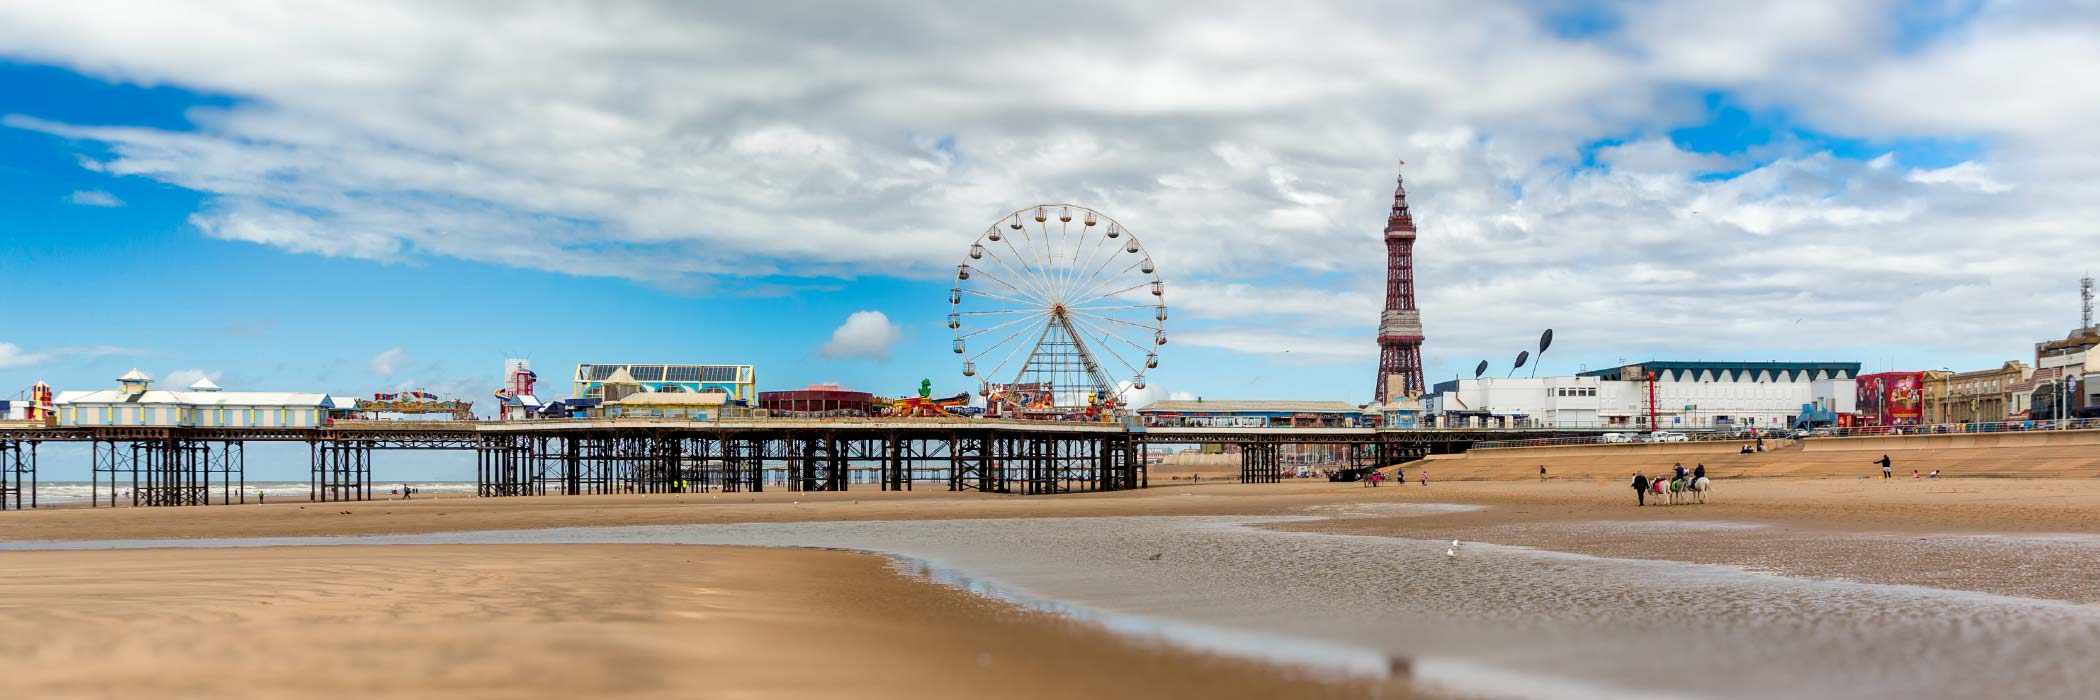 Cheap Hotels in Blackpool